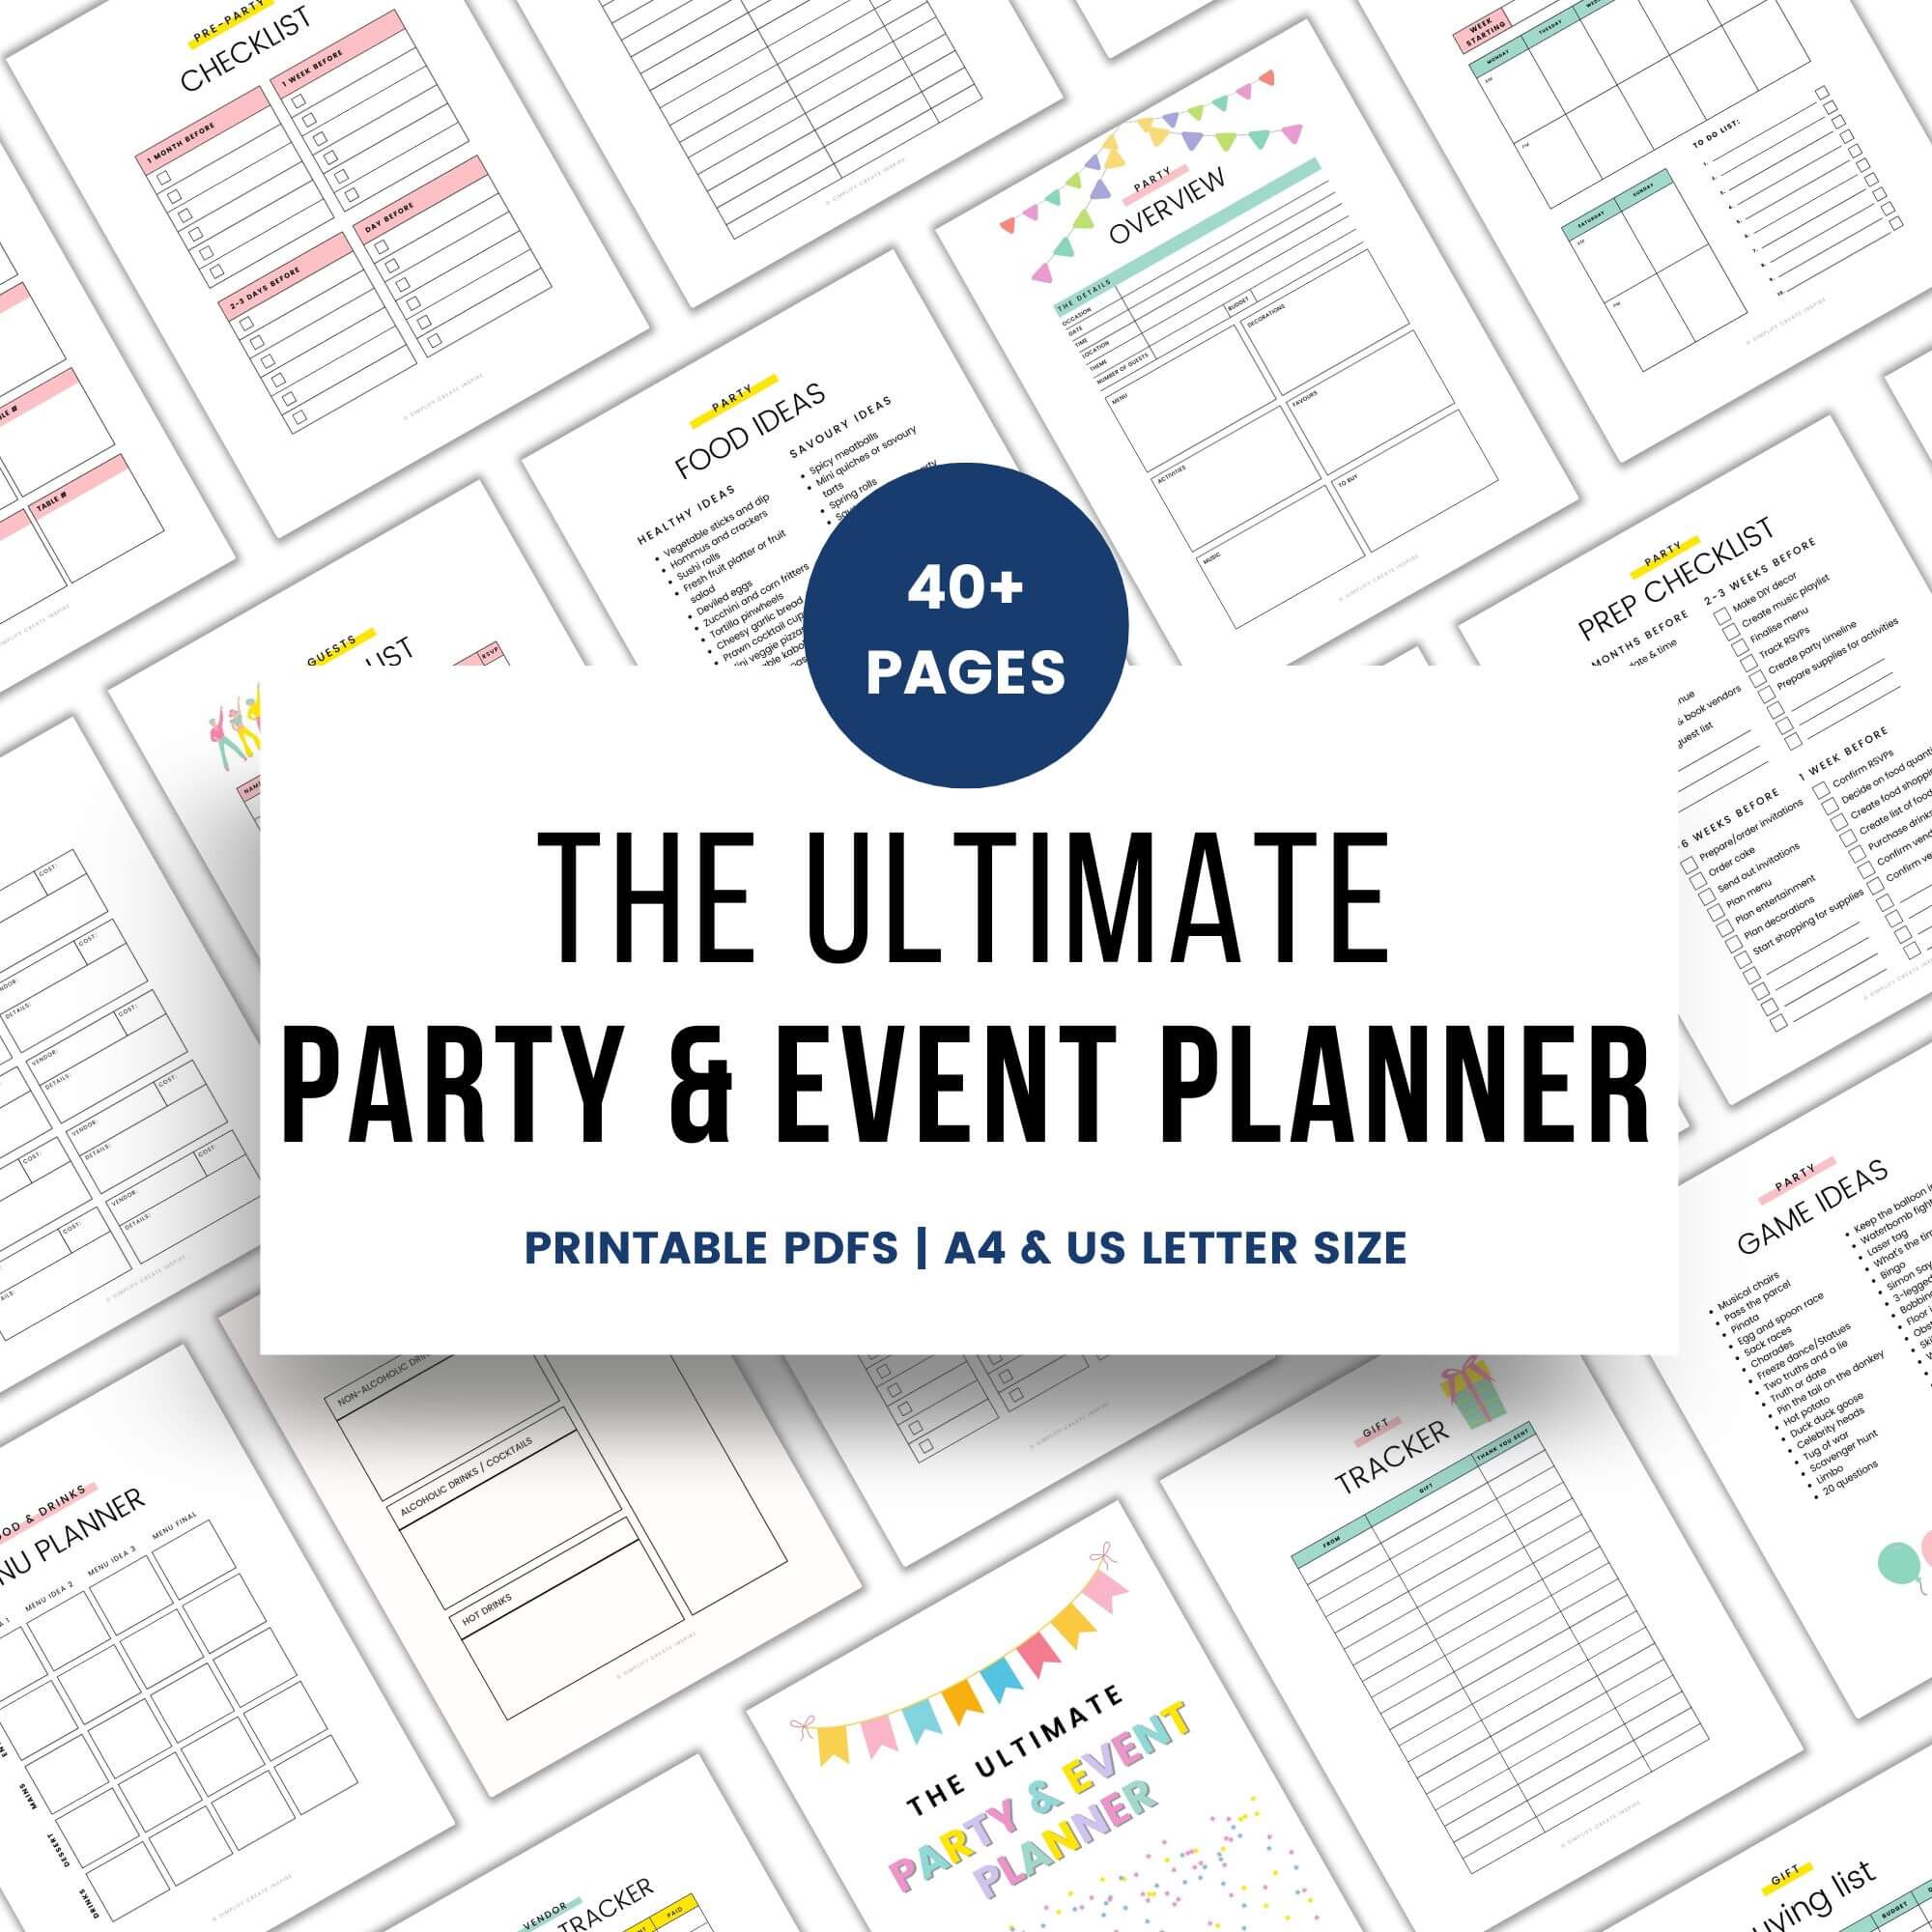 Printable party planner